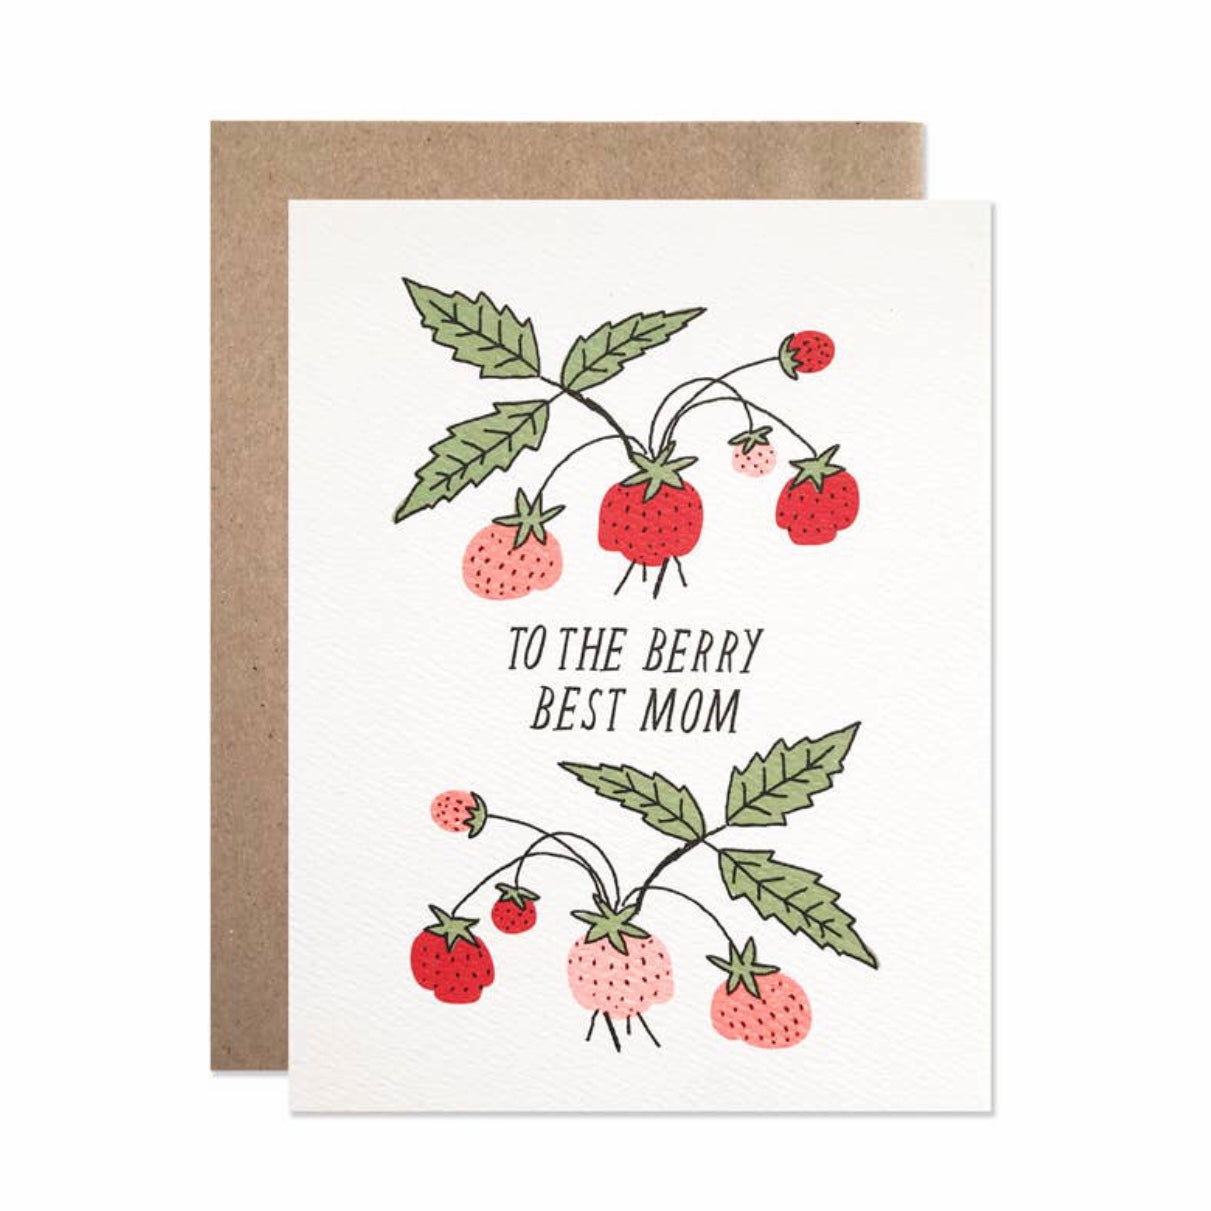 To the berry best mom mothers day card